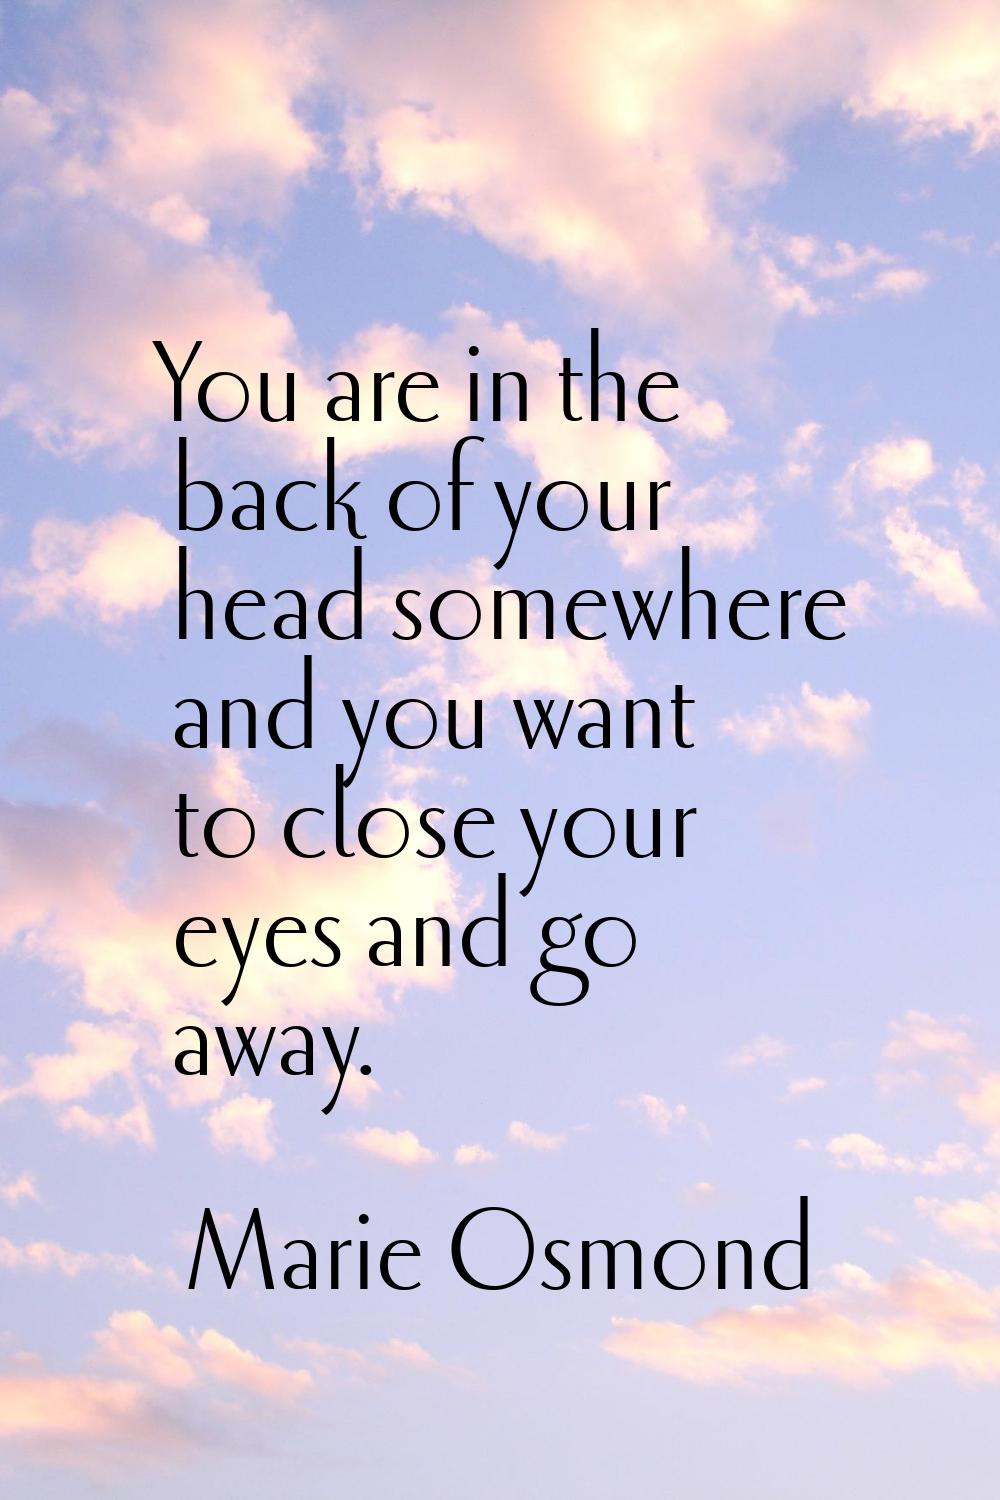 You are in the back of your head somewhere and you want to close your eyes and go away.